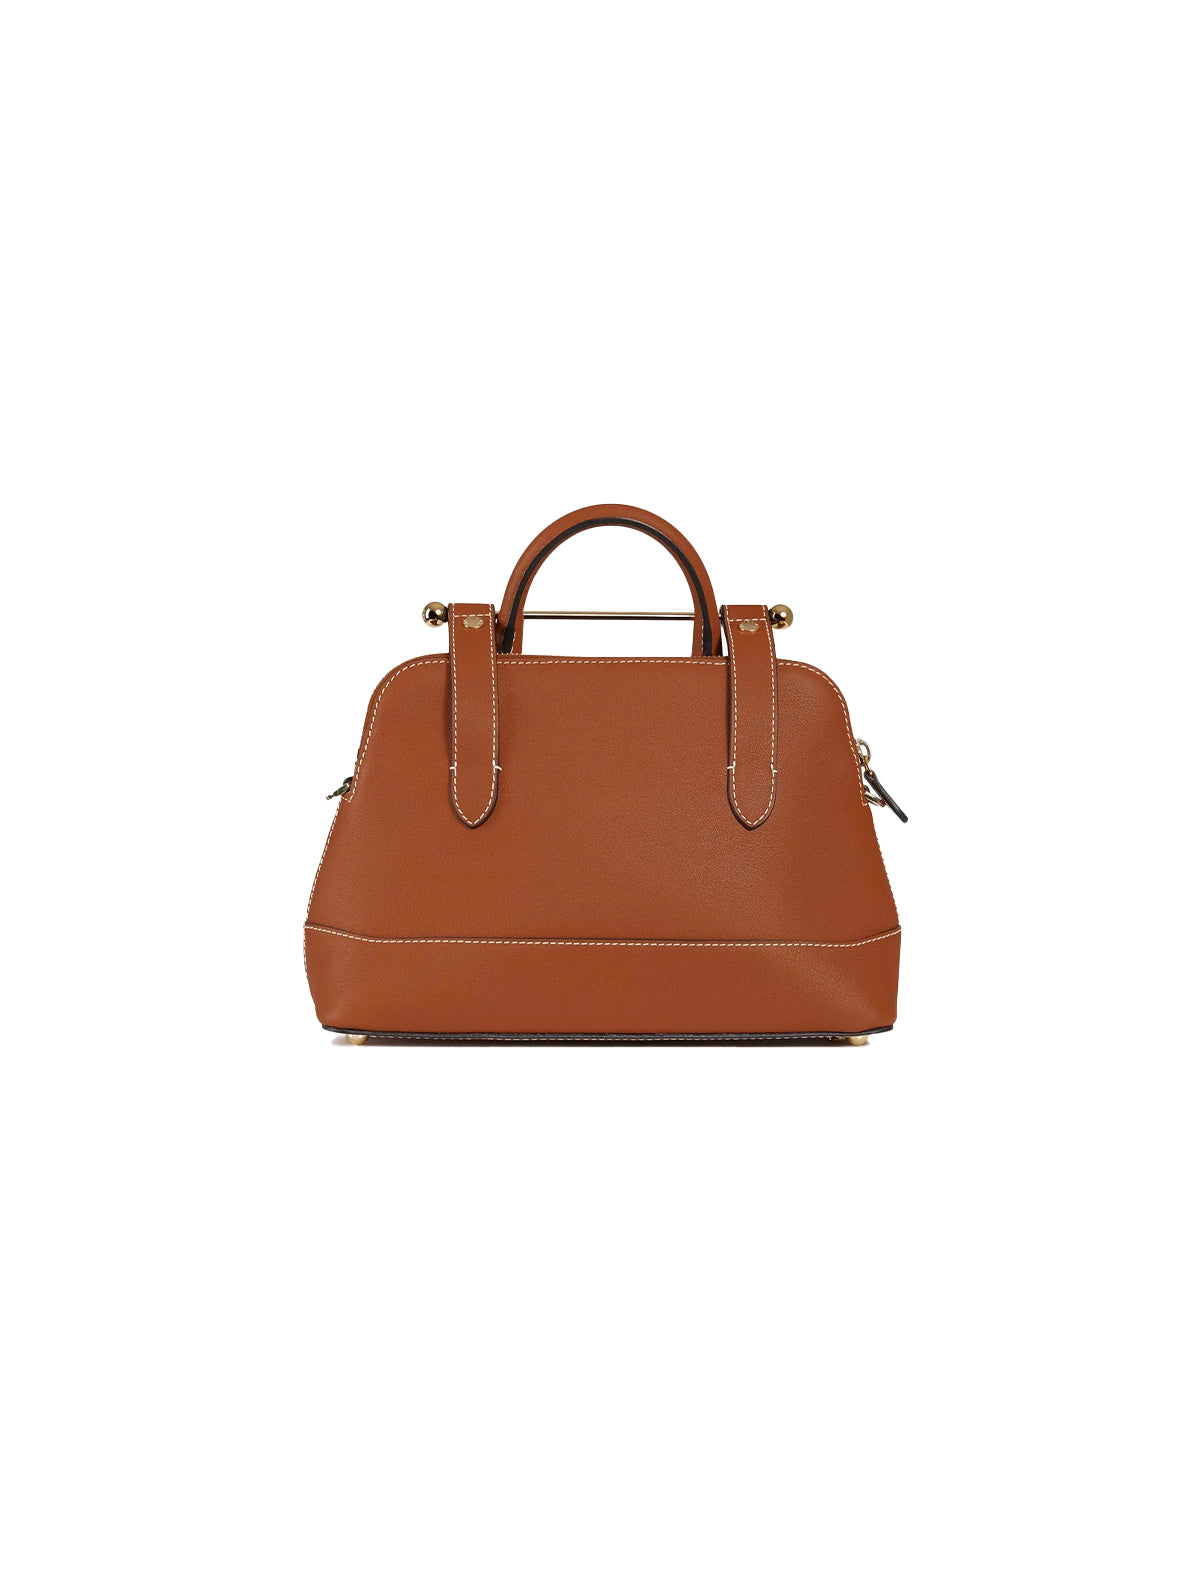 STRATHBERRY Dome Mini Bag in Chestnut